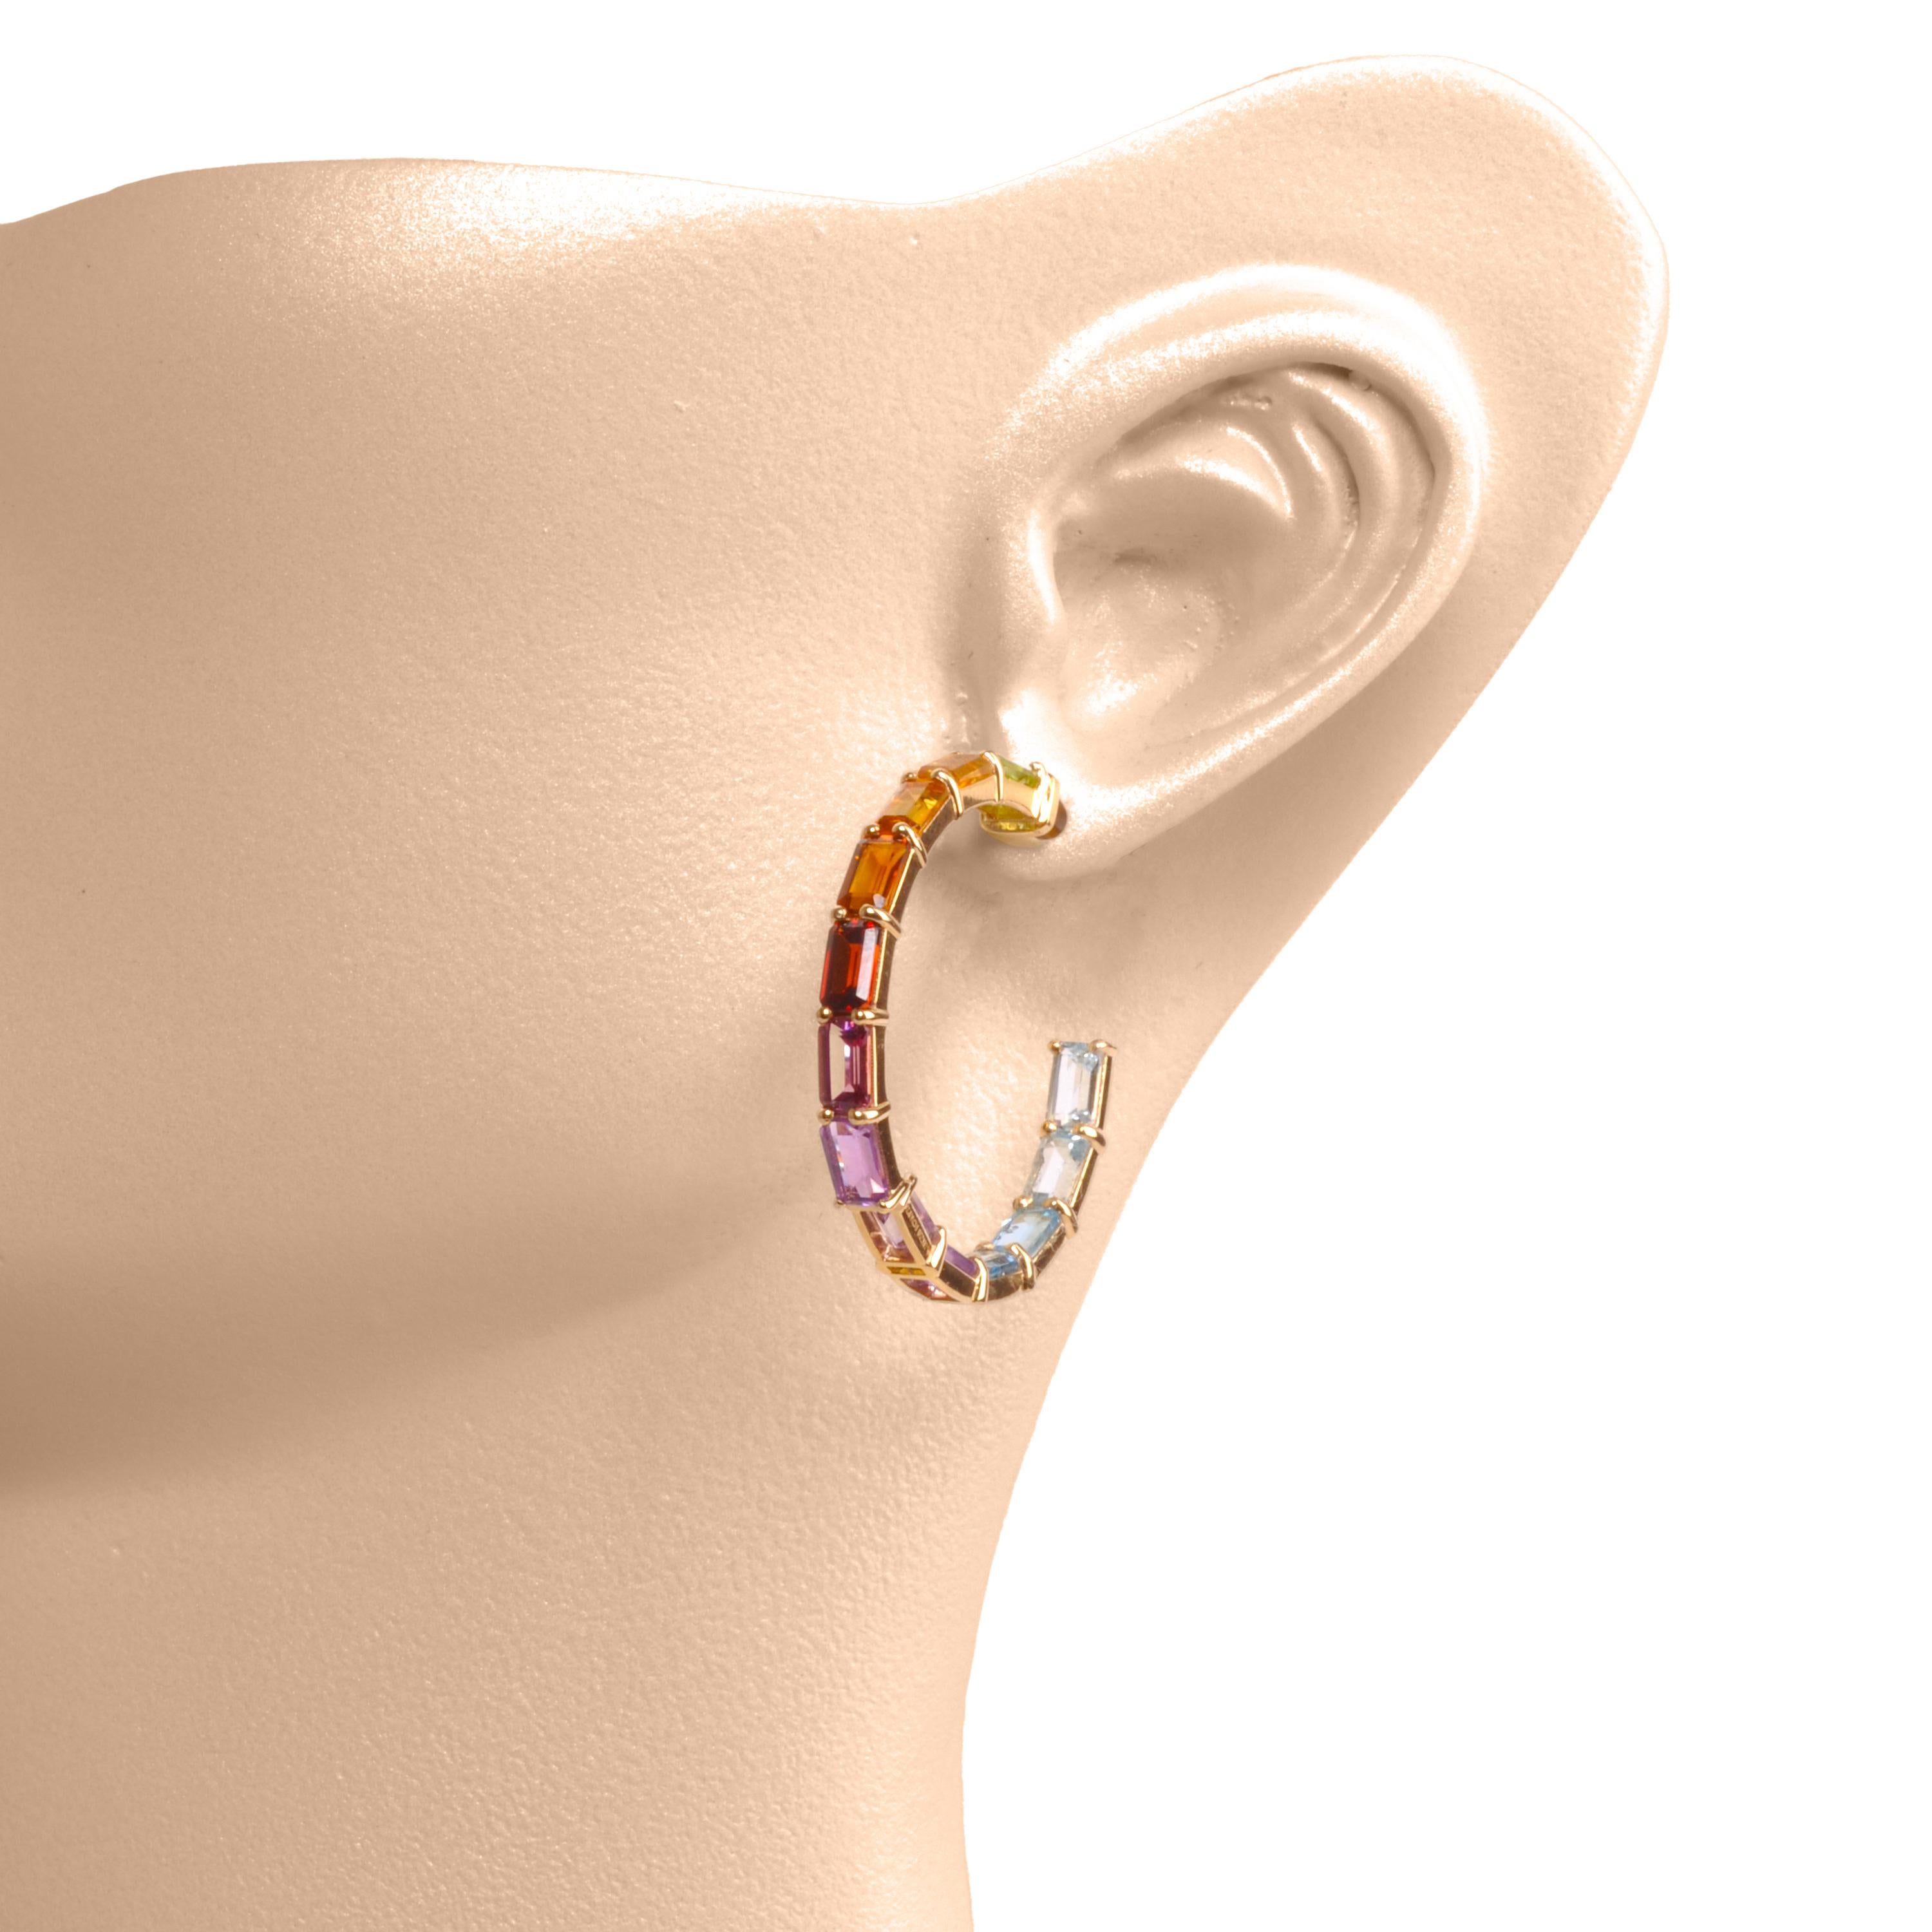 18 karat gold 5x3mm octagon rainbow gemstones prong-set hoop earrings.

Step into a world of vibrant charm with the Multi Rainbow Hoops Earrings, celebrating the kaleidoscope of colors found in nature. These exquisite earrings blend contemporary